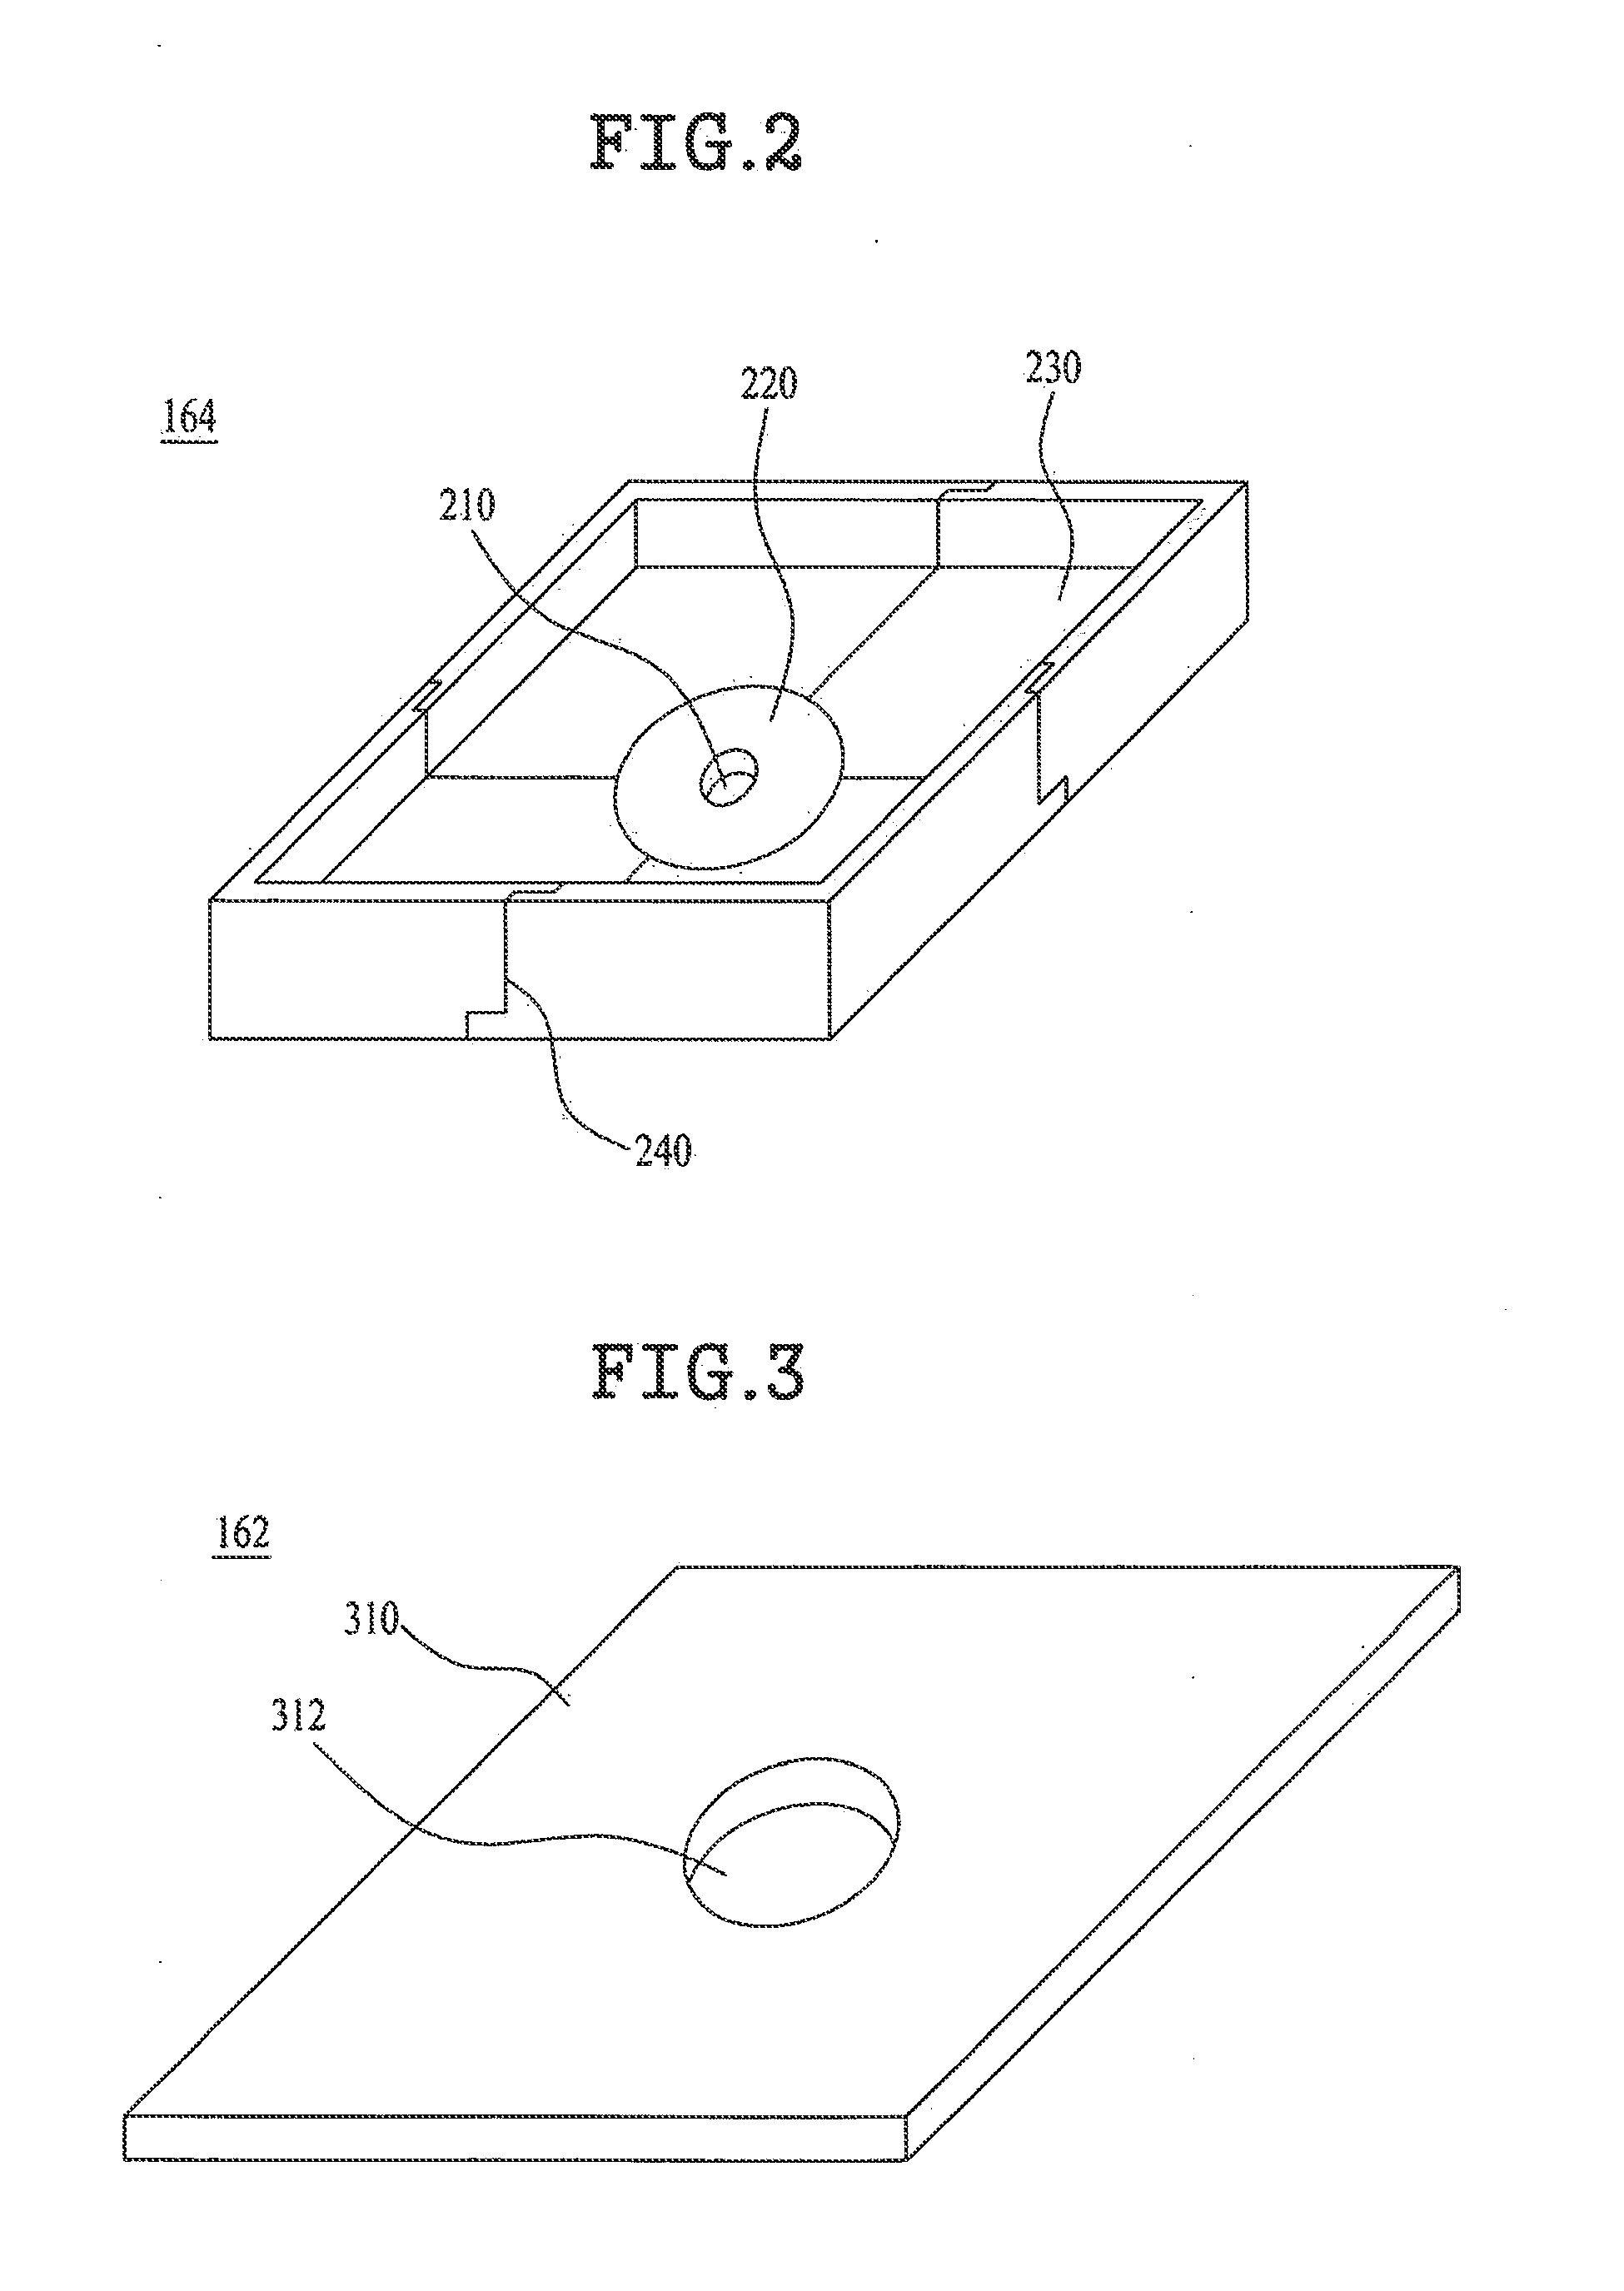 Dry etching apparatus